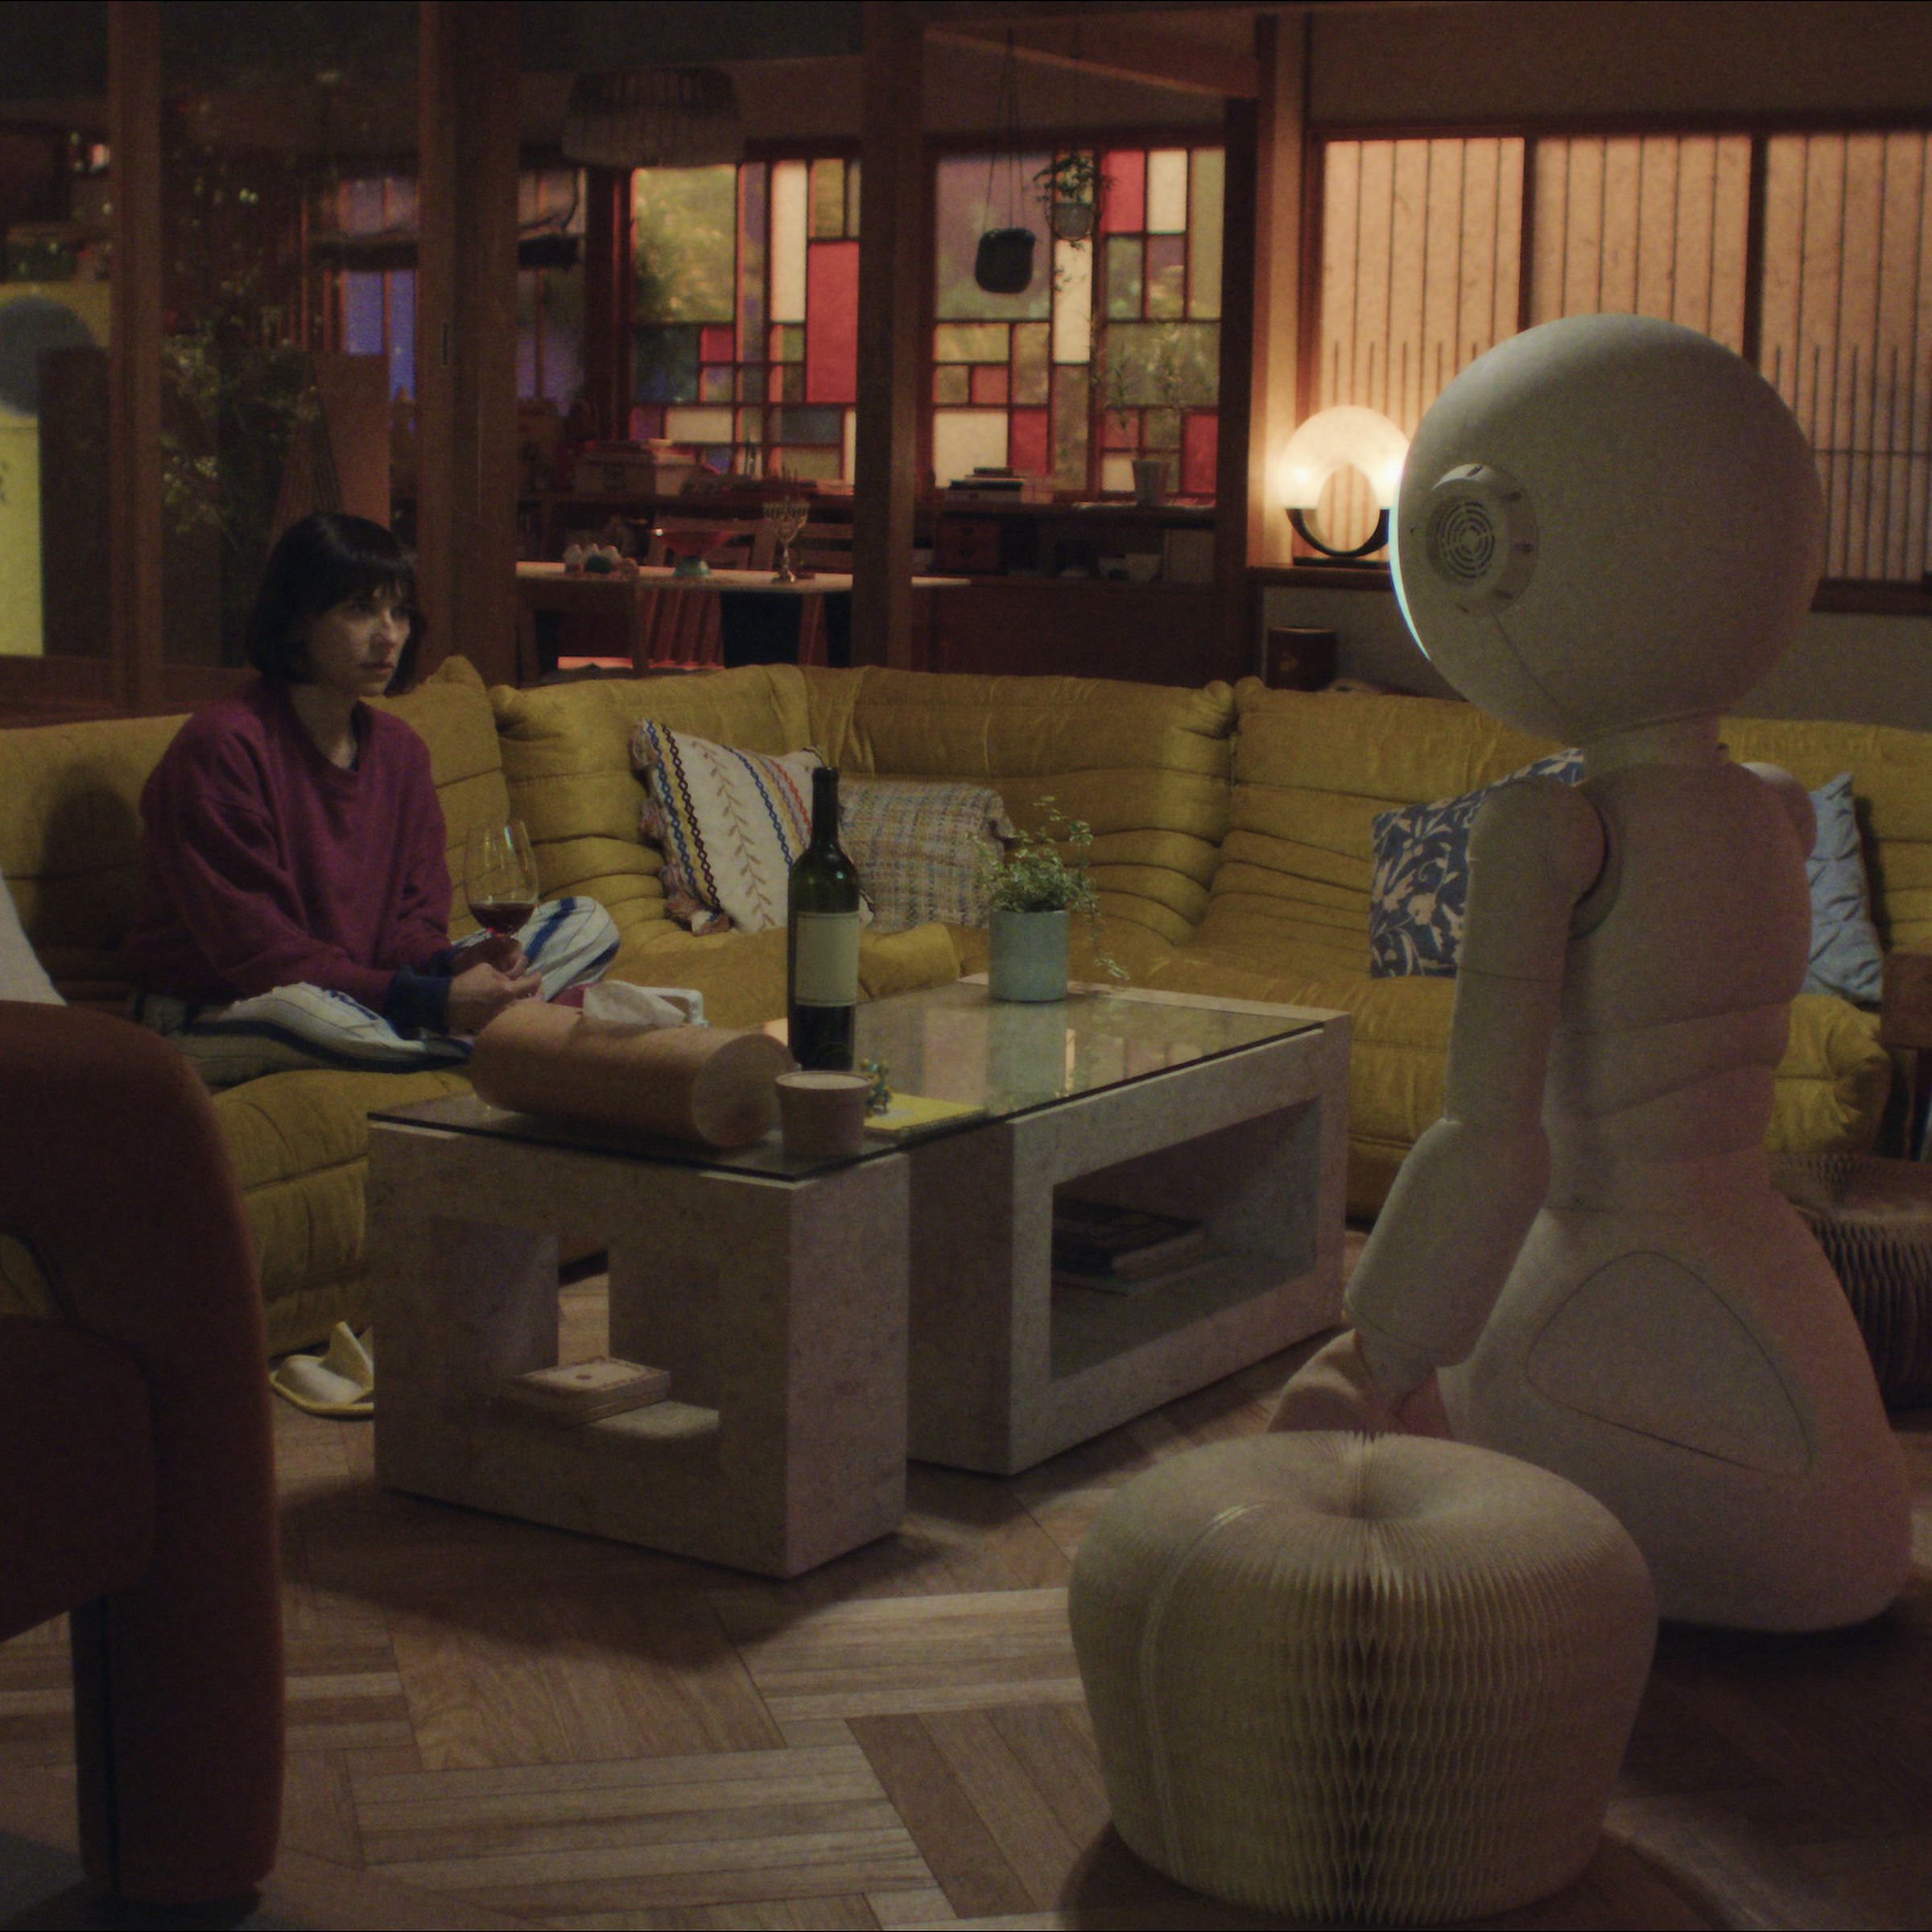 A woman sitting on a couch in a cozy living room across from a humanoid robot.